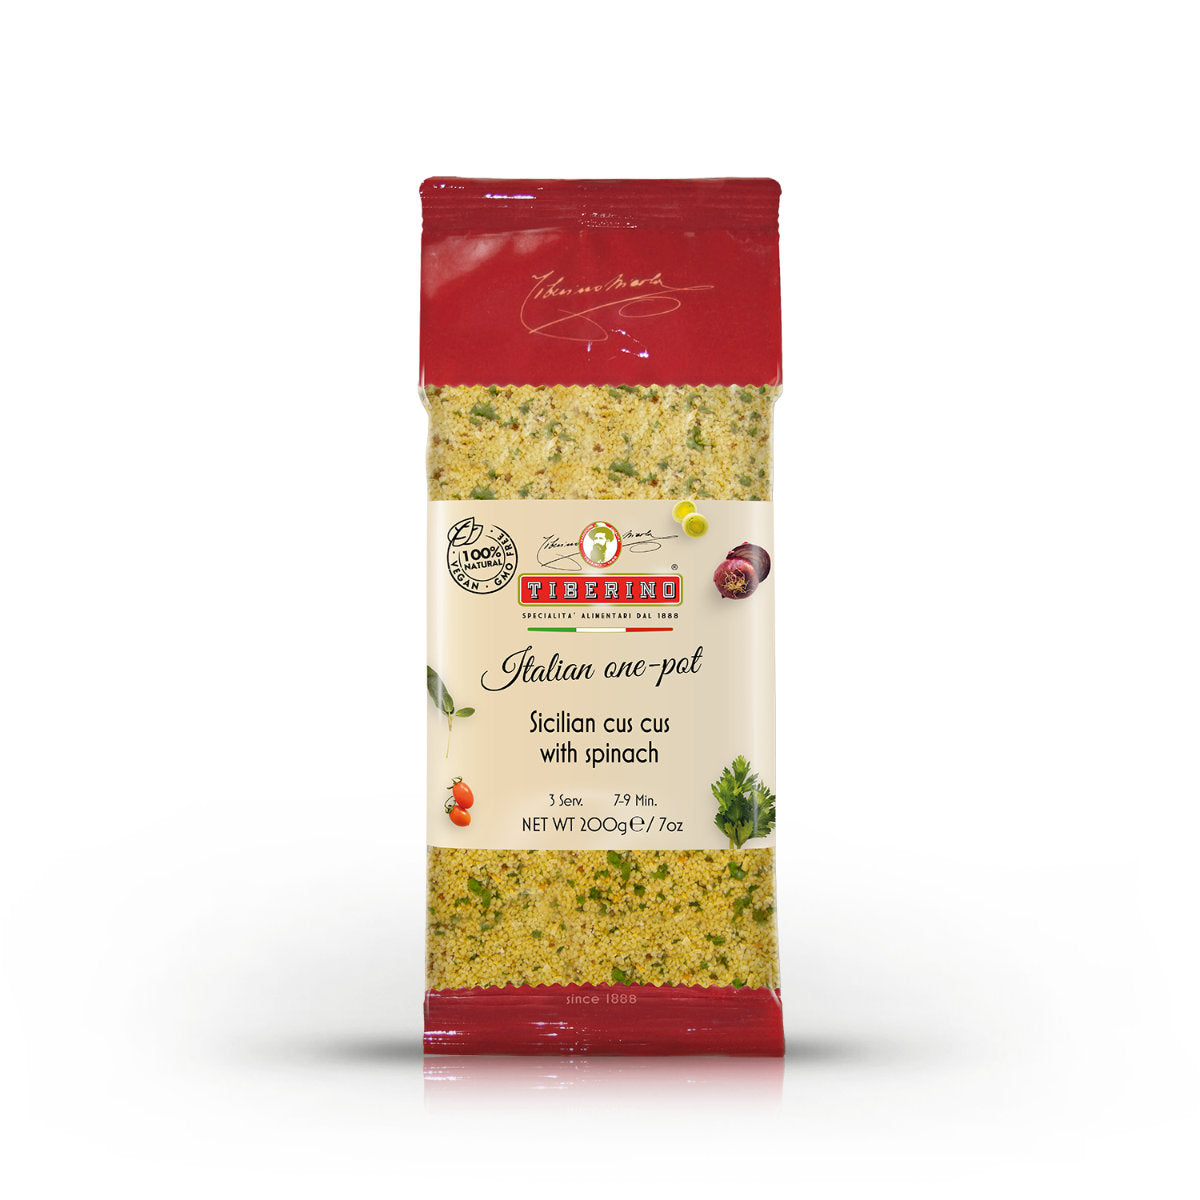 Cous cous extra large agli spinaci